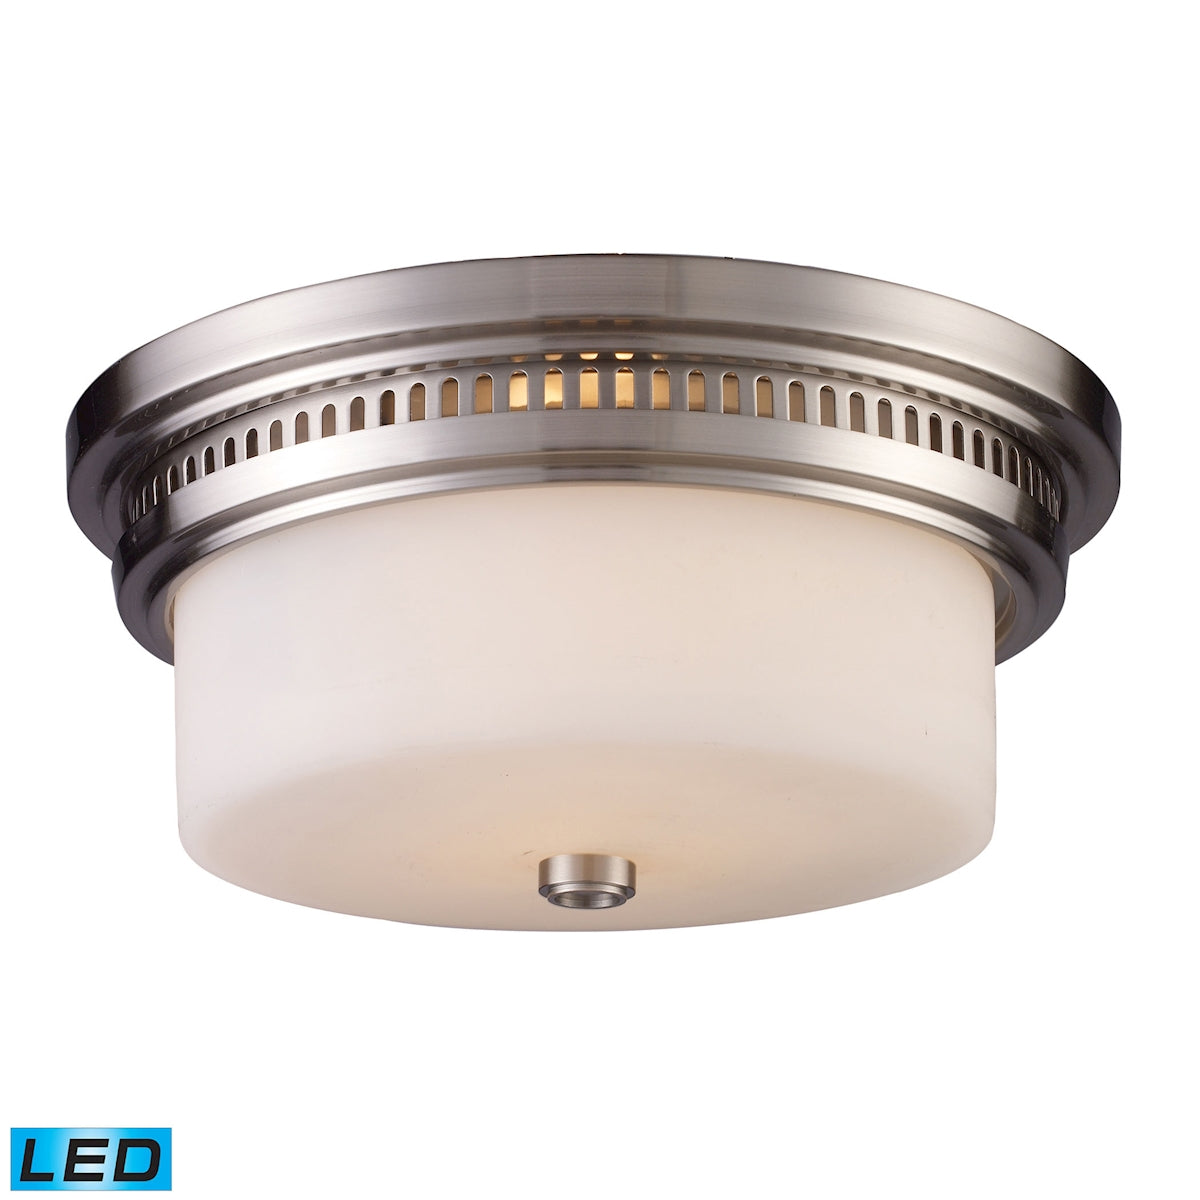 ELK Lighting 66121-2-LED Chadwick 2-Light Flush Mount in Satin Nickel with White Glass - Includes LED Bulbs